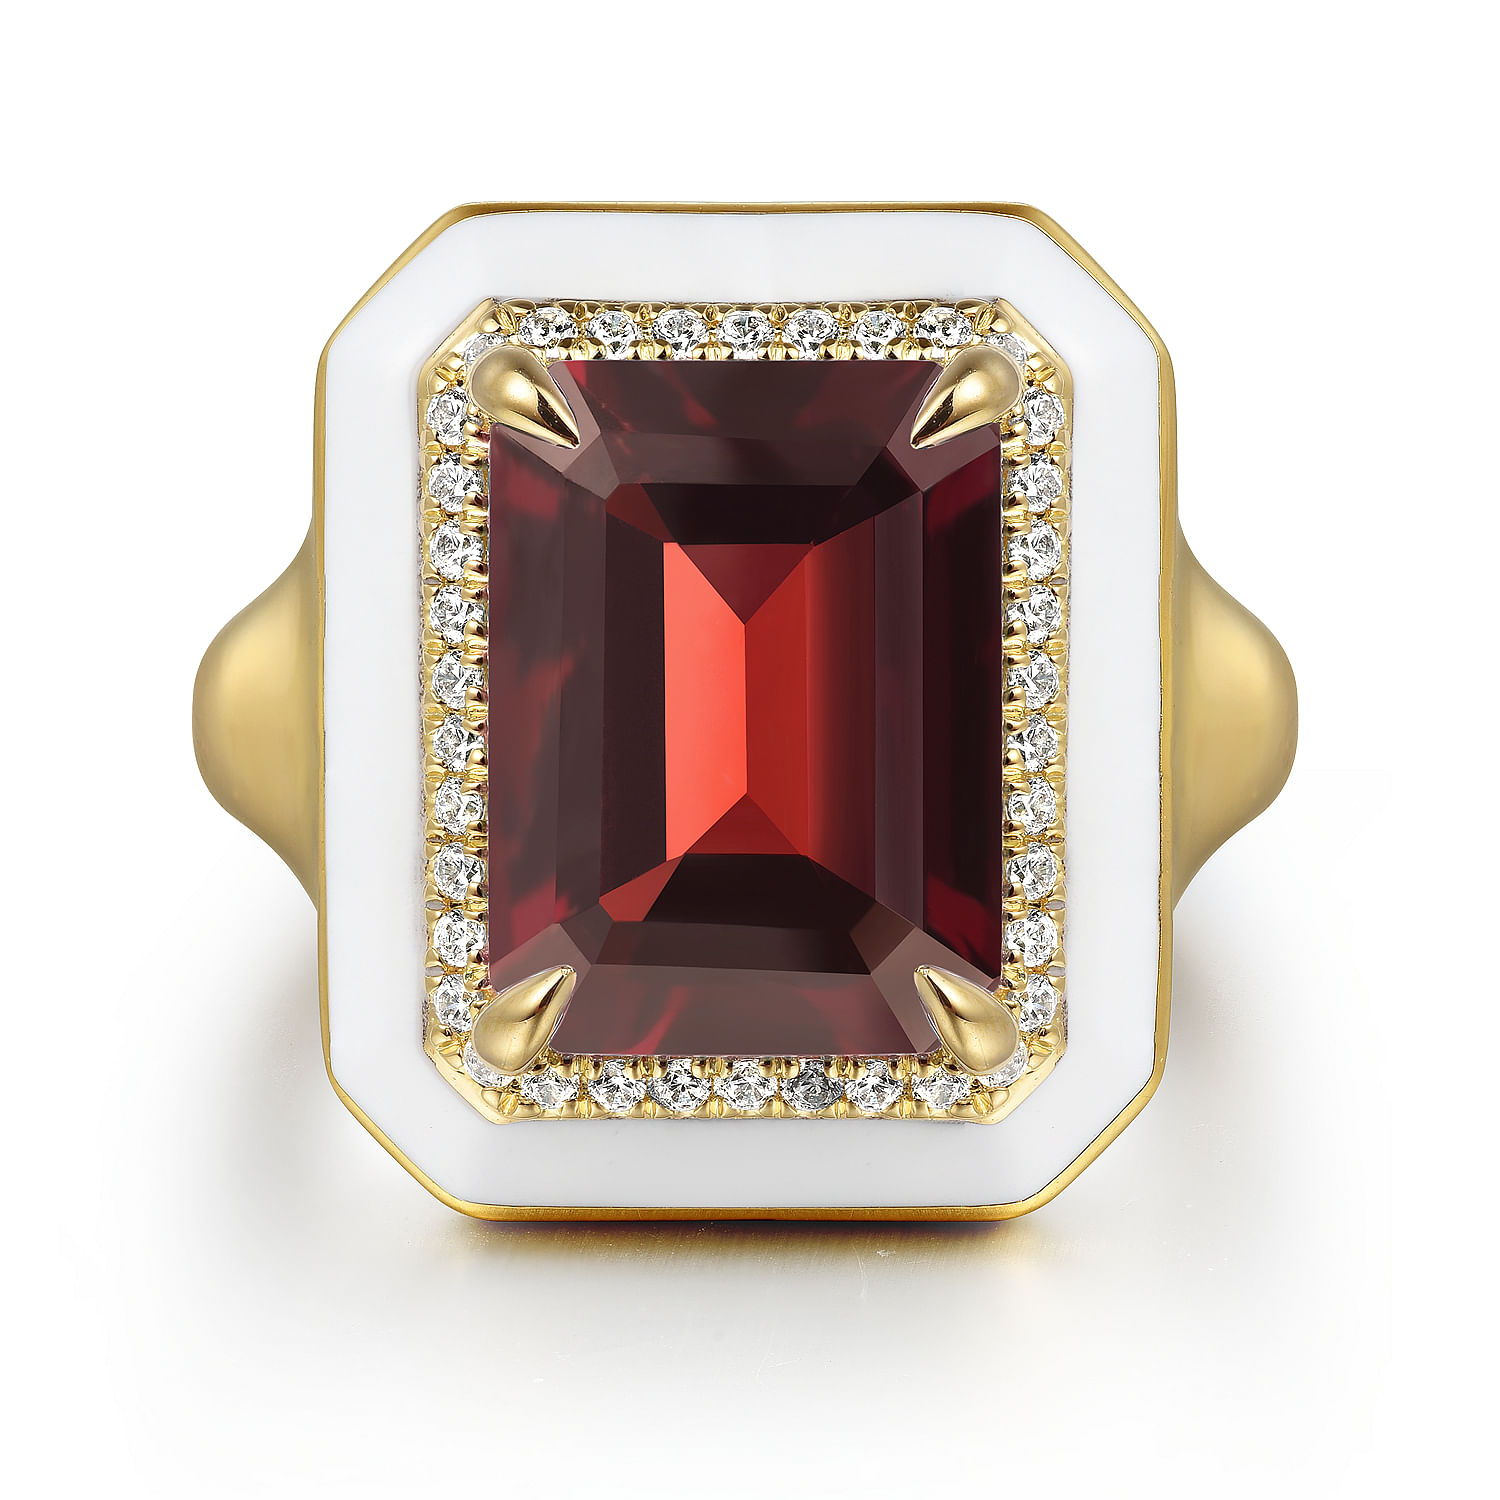 Gabriel - 14K Yellow Gold Diamond and Garnet Emerald Cut Ladies Ring With Flower Pattern J-Back and White Enamel